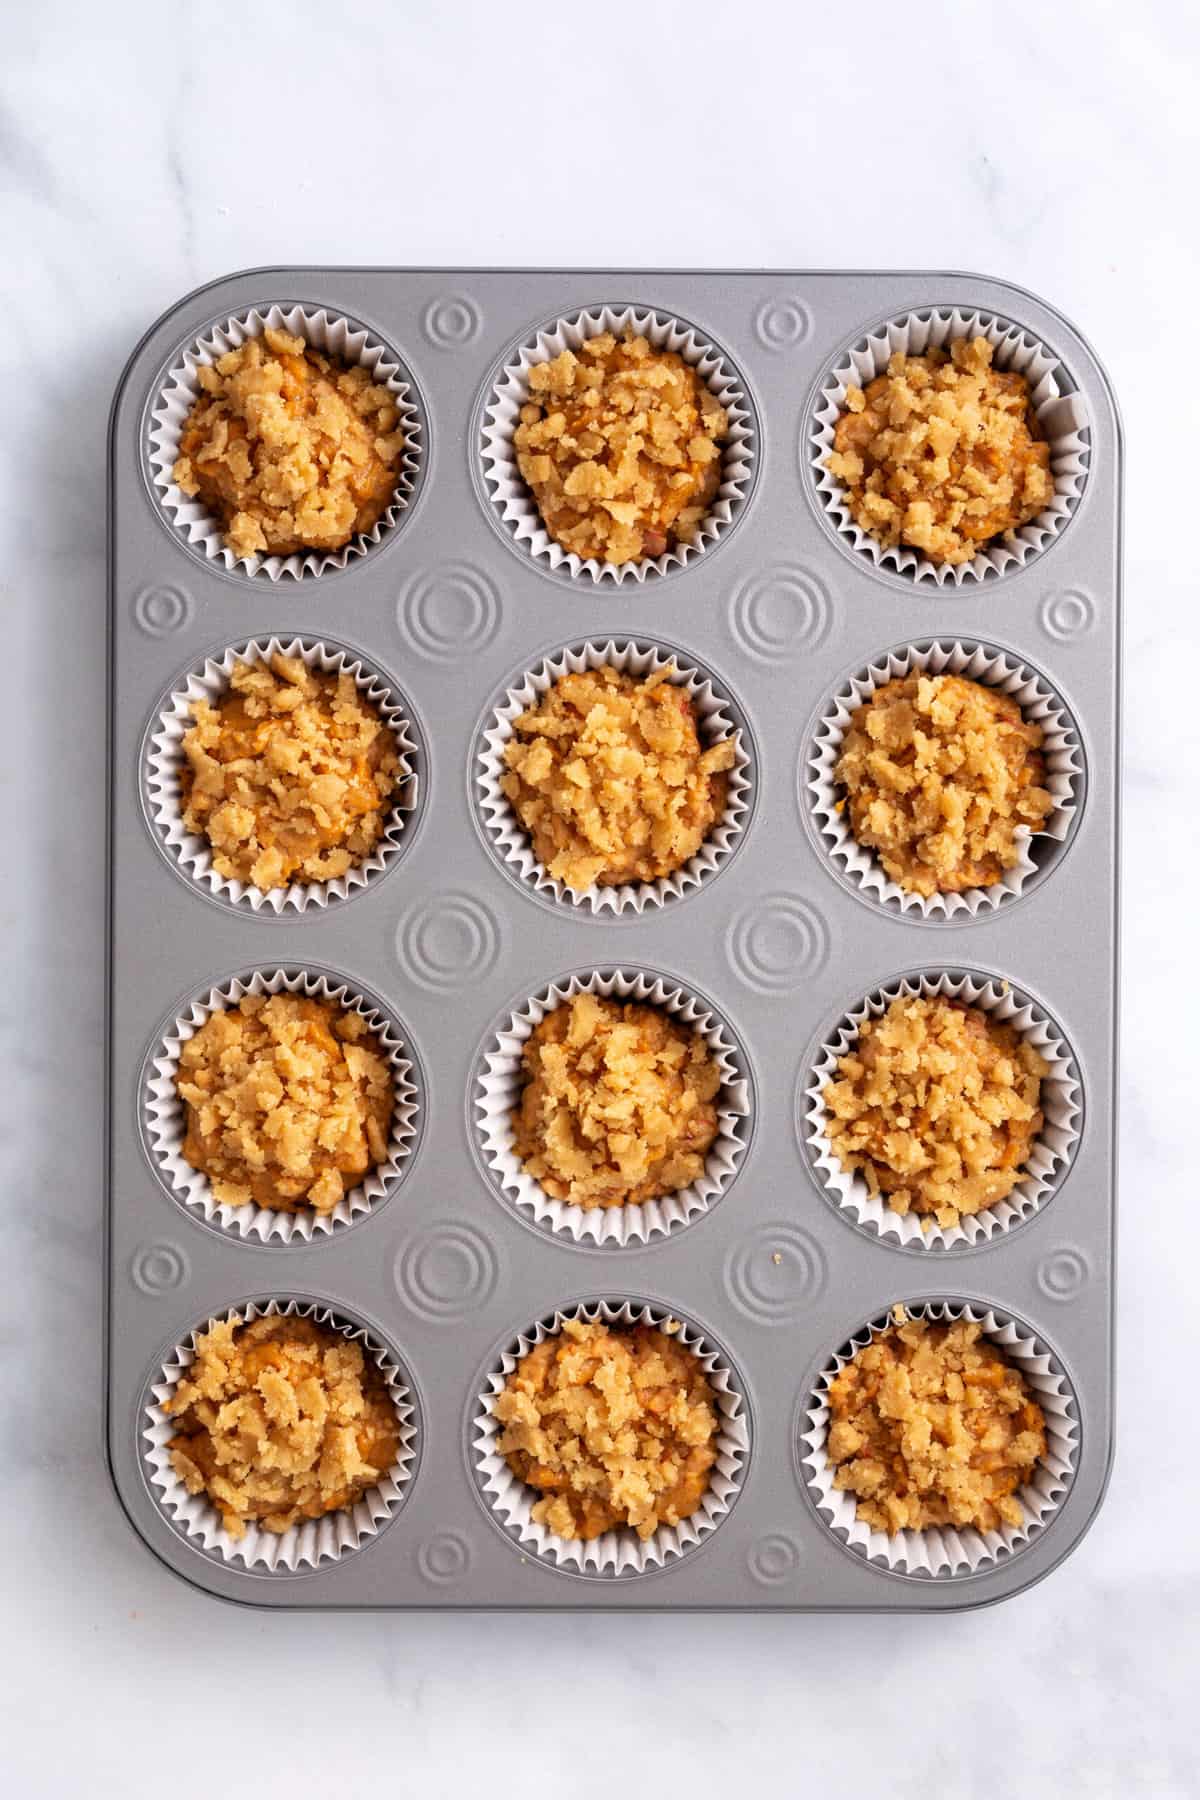 pumpkin muffin batter topped with crumble mixture prepared in a muffin lined tin